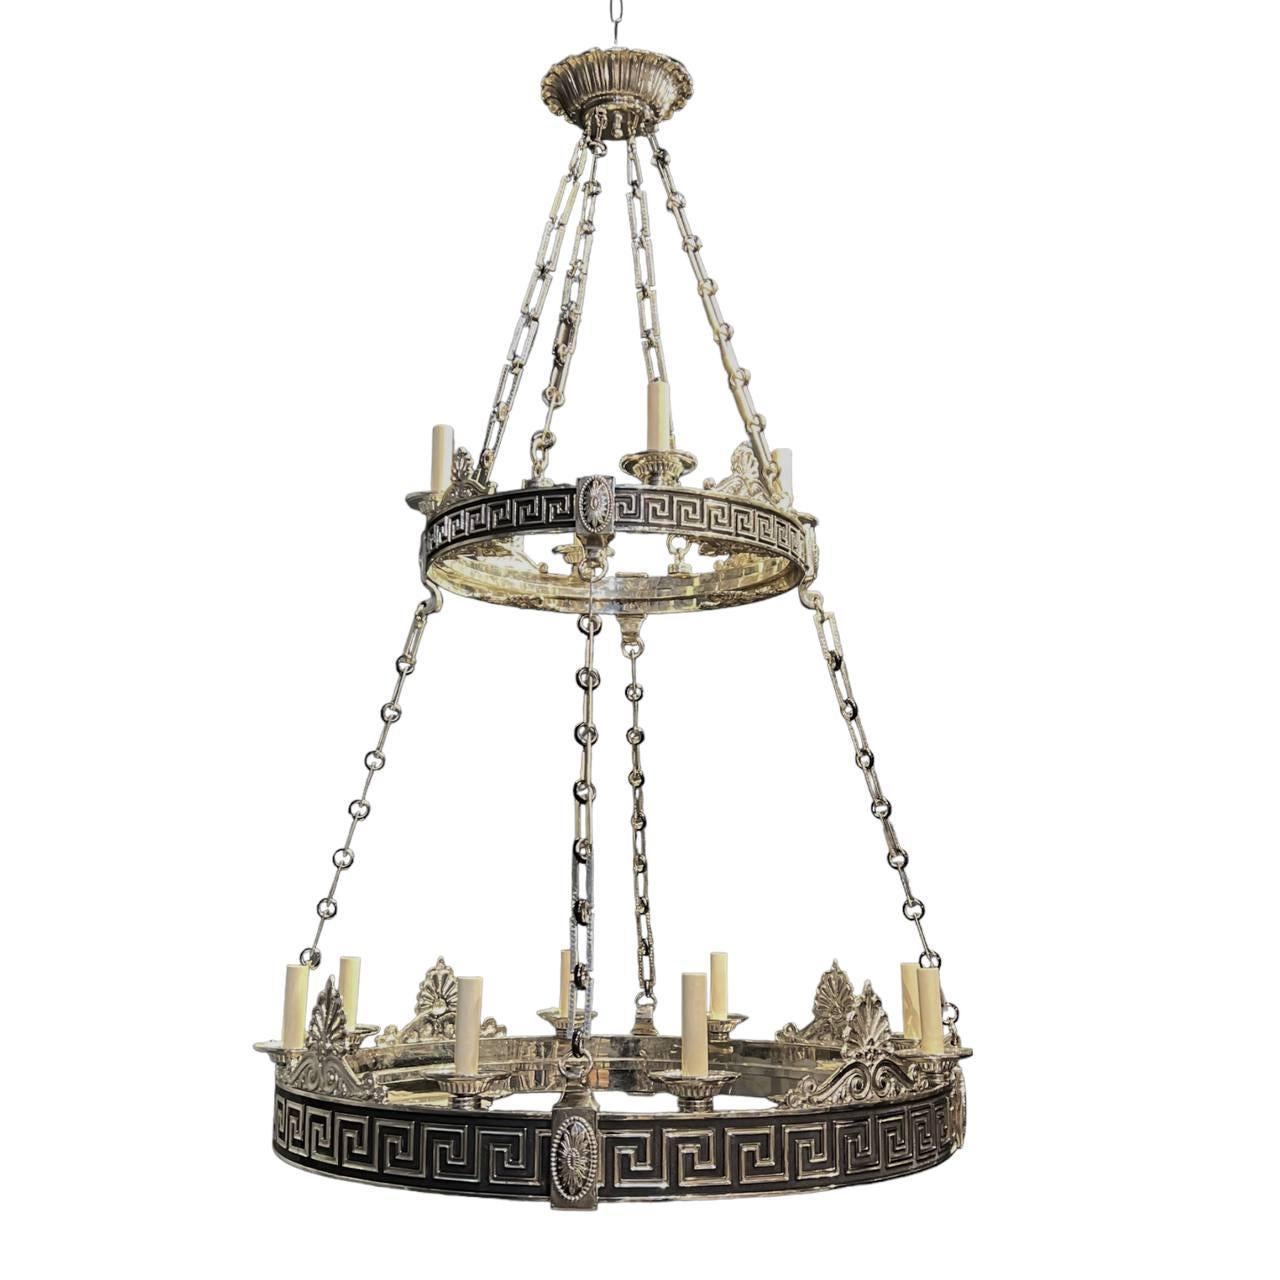 A pair of circa 1900's  Neoclassic style two tiers 16 lights chandelier with Greek key design and black patina